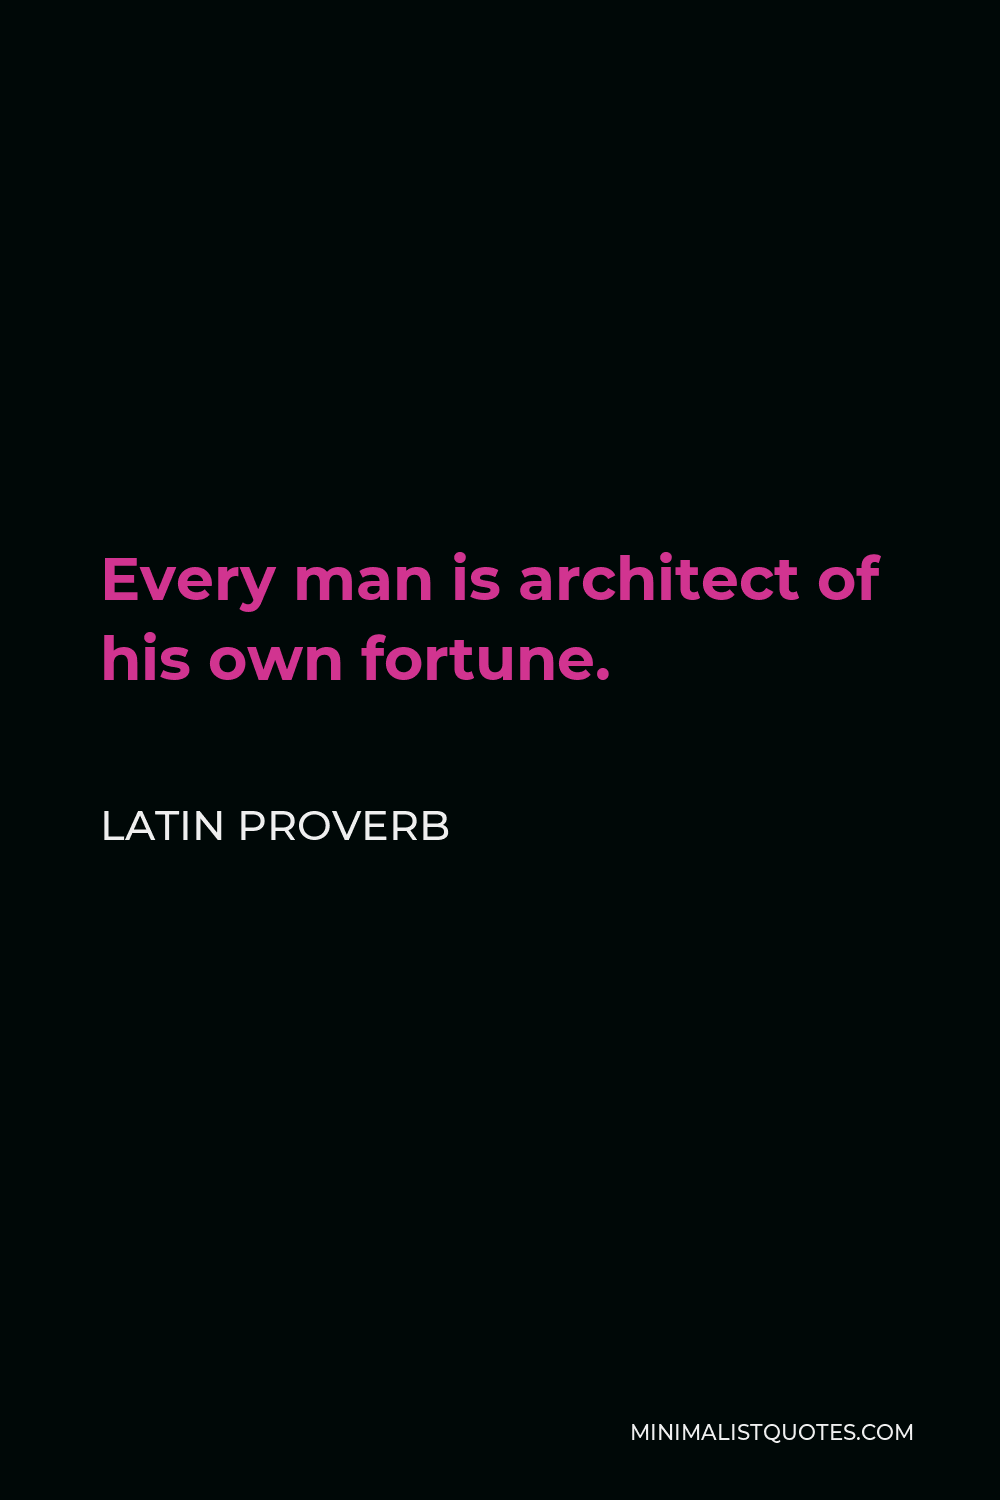 Latin Proverb Quote - Every man is architect of his own fortune.